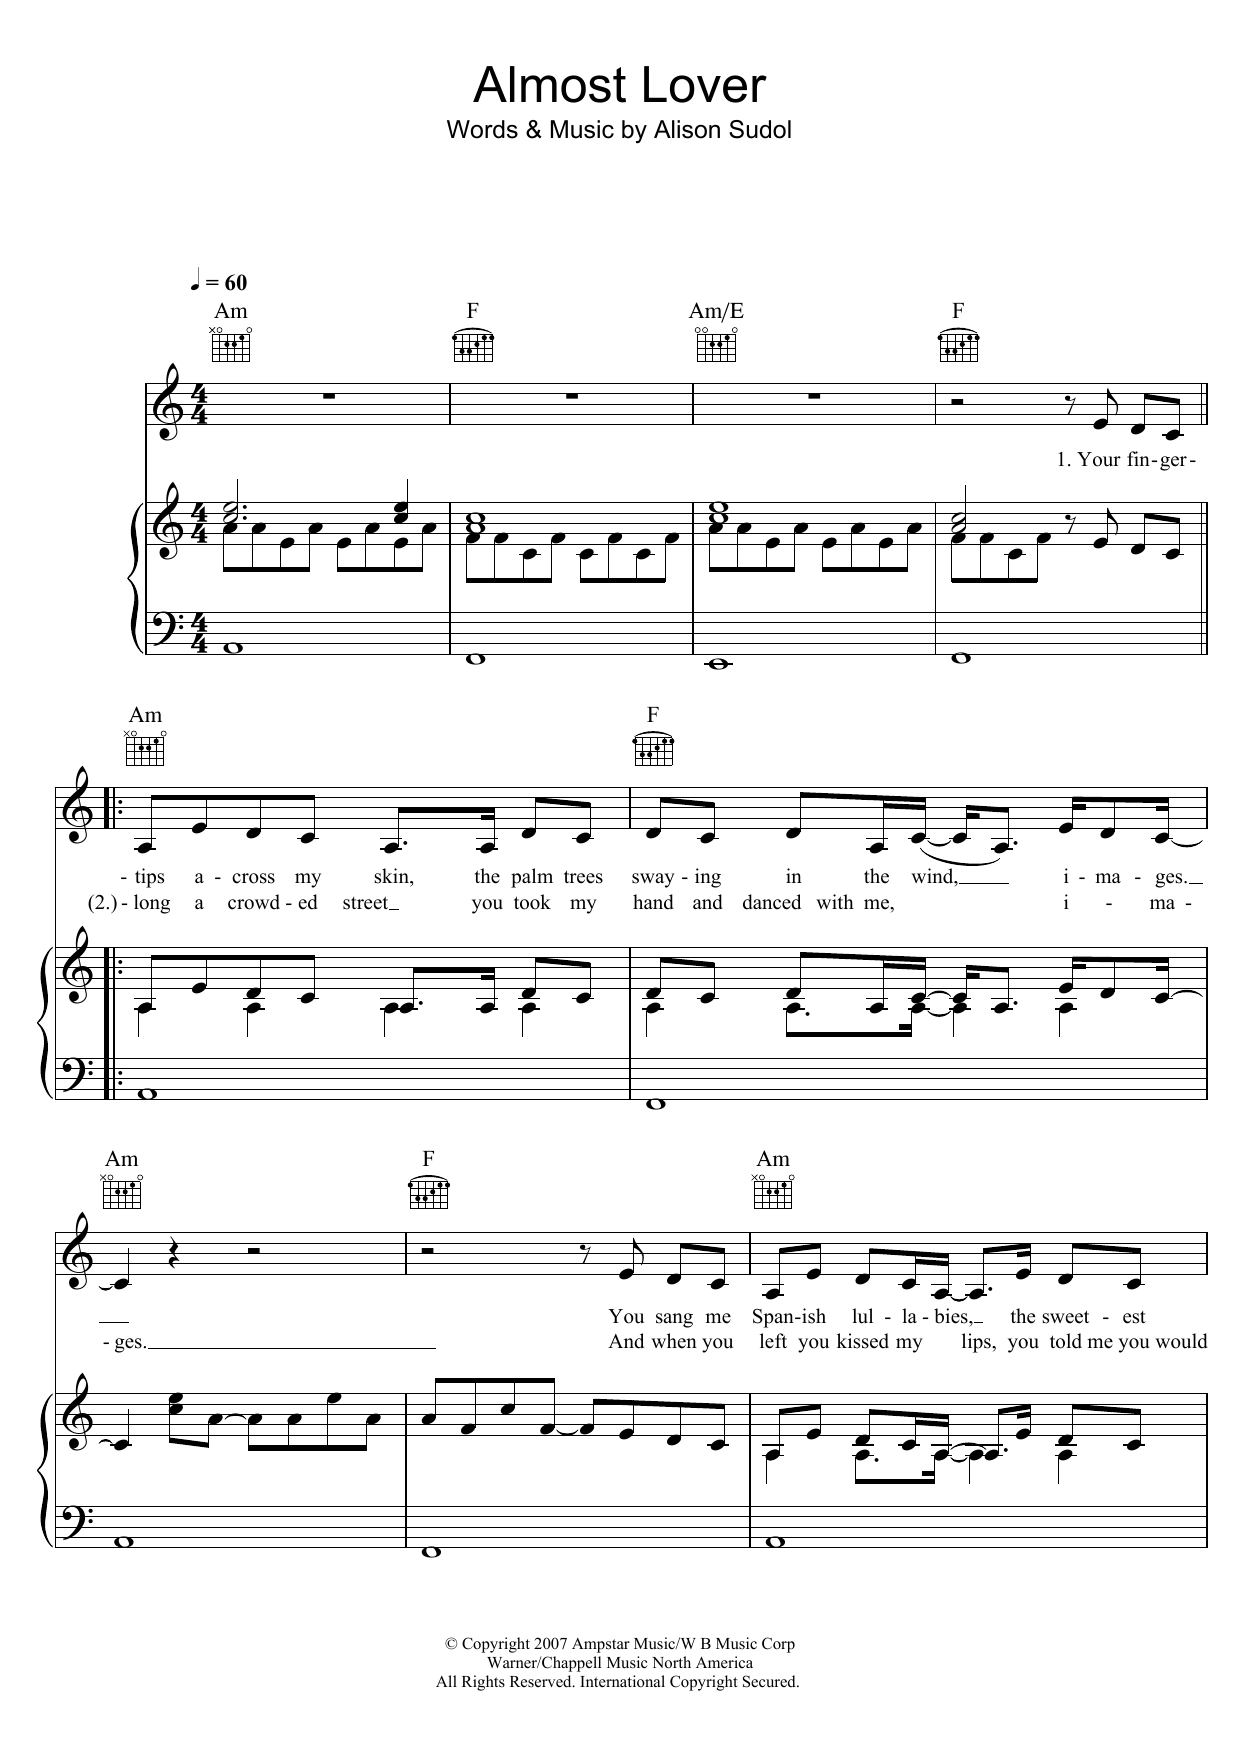 A Fine Frenzy Almost Lover sheet music notes and chords. Download Printable PDF.